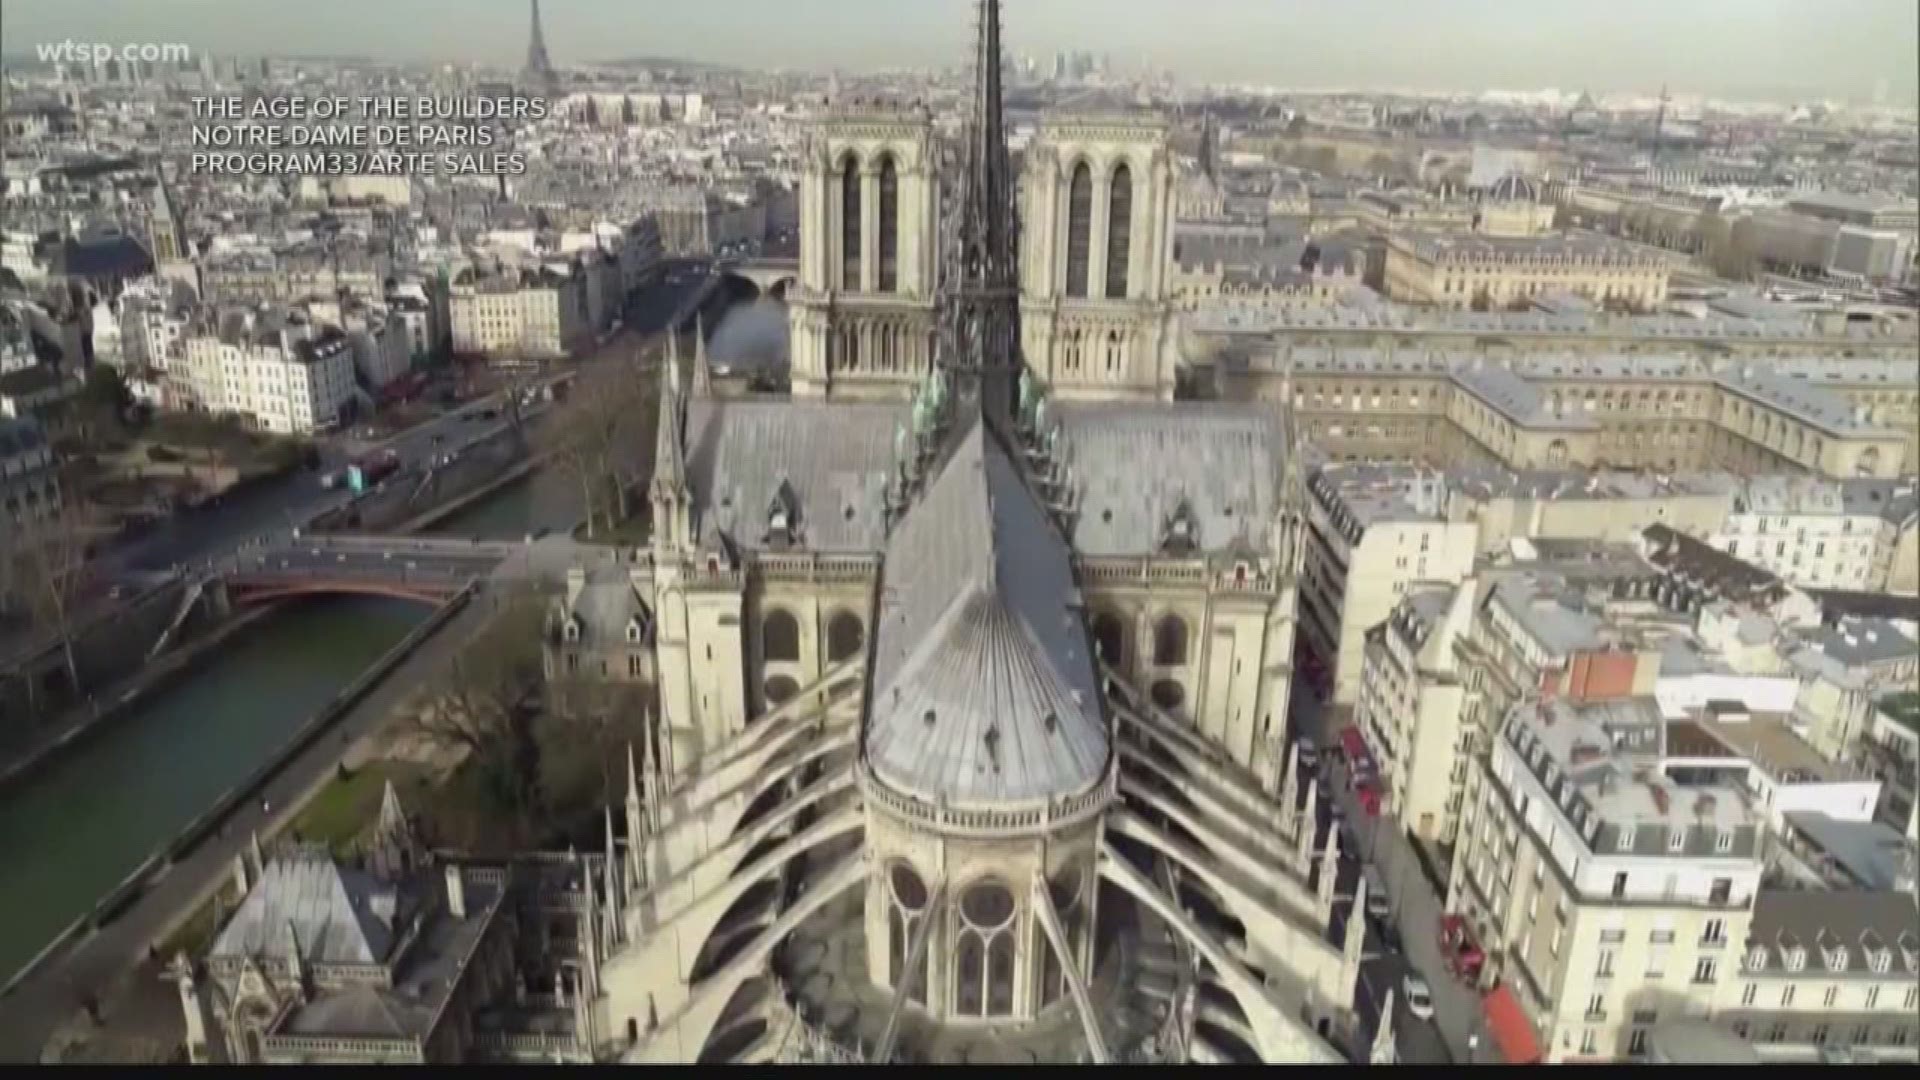 To many, the 850-year-old landmark is the heart of Paris. https://on.wtsp.com/2UGsZ0Q